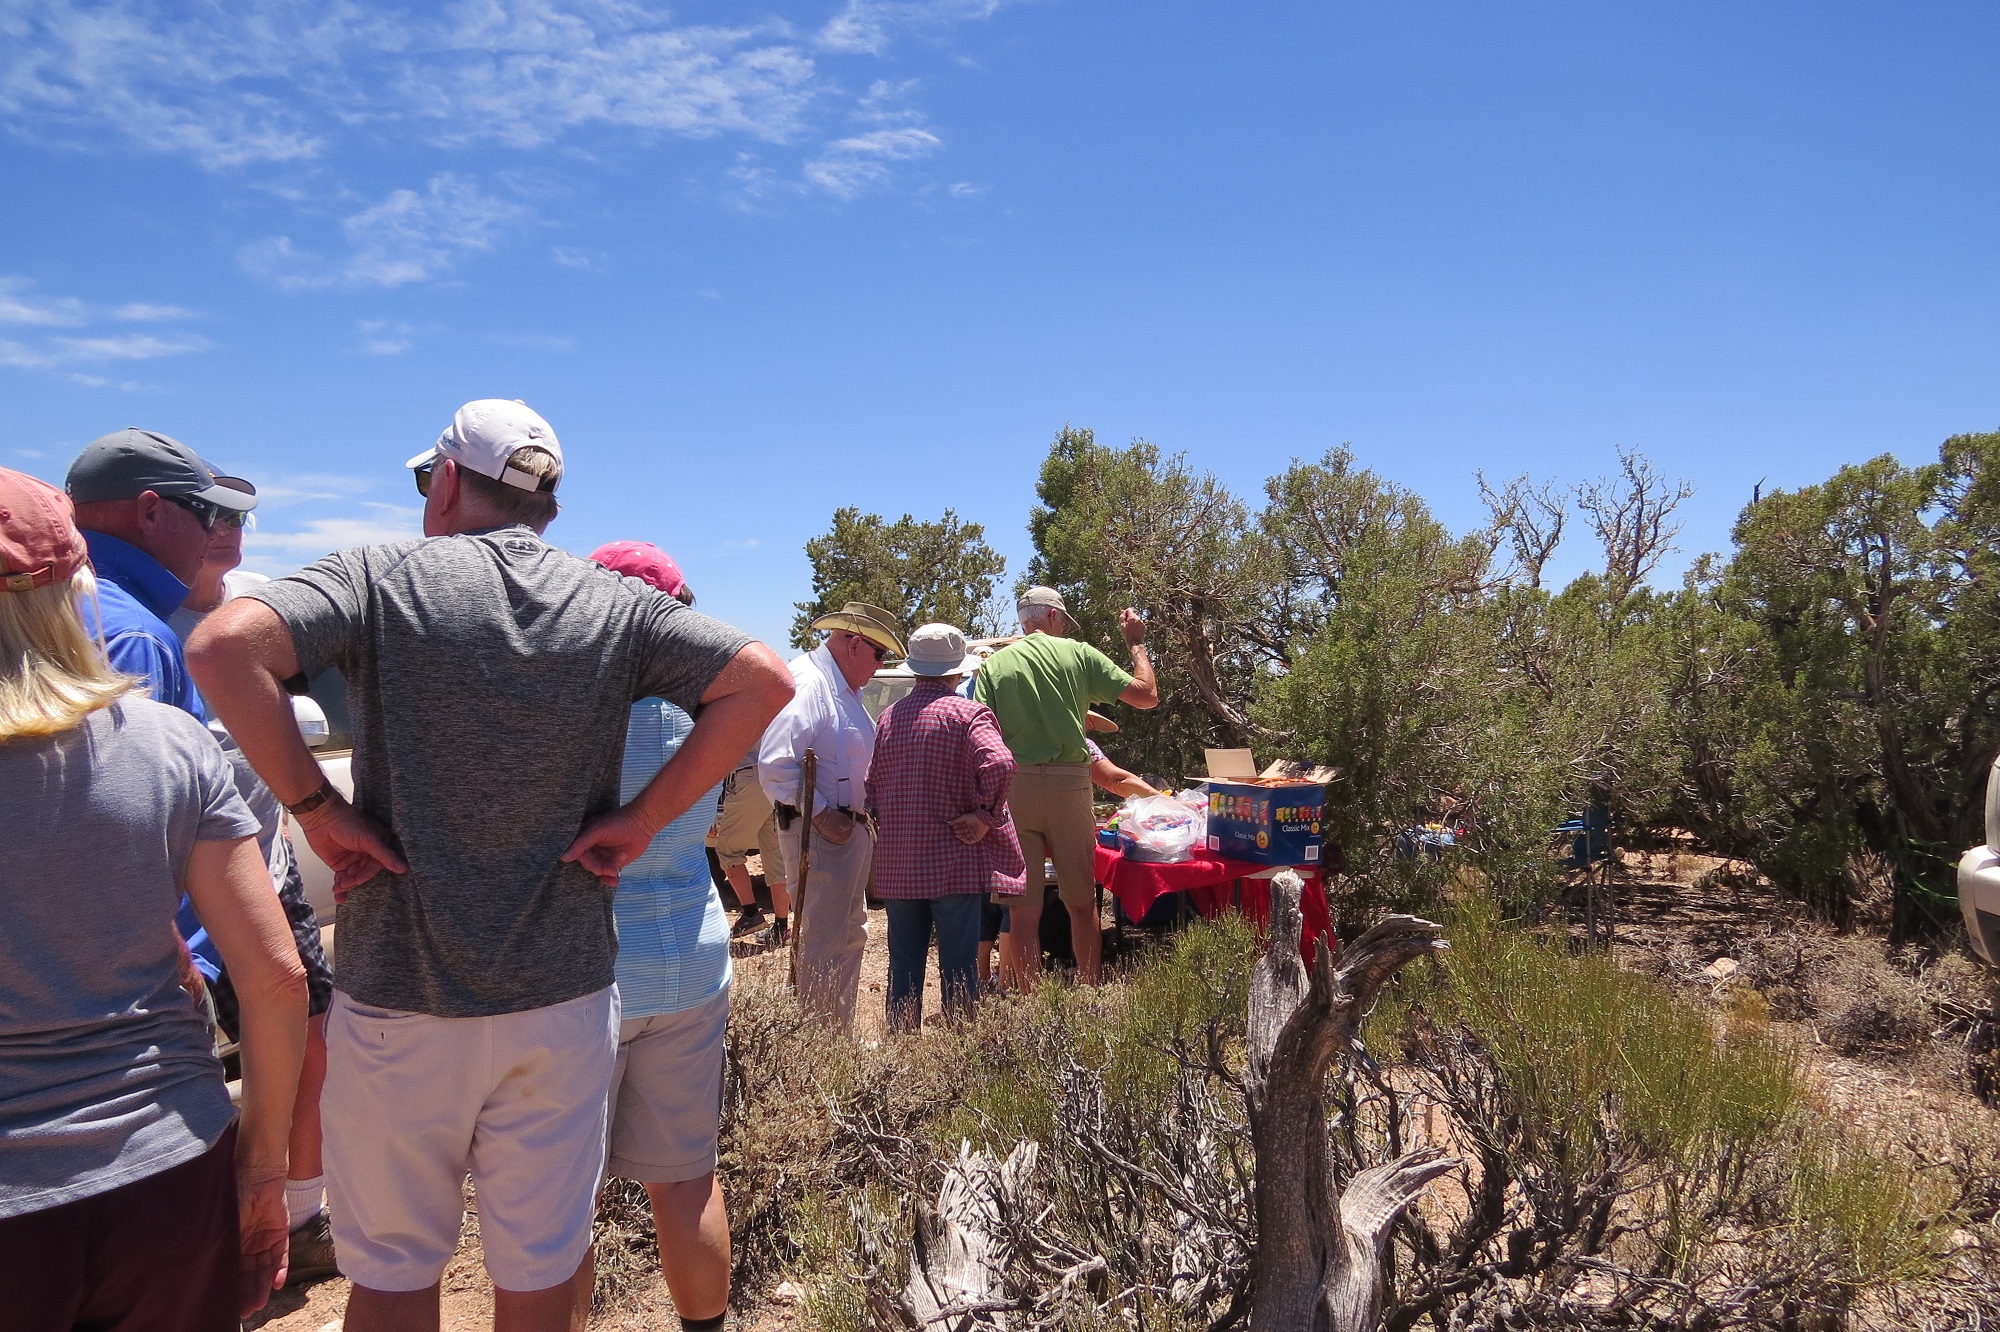 DASIA field trip people lined up for the buffet lunch at Kanab Point on the Arizona Strip